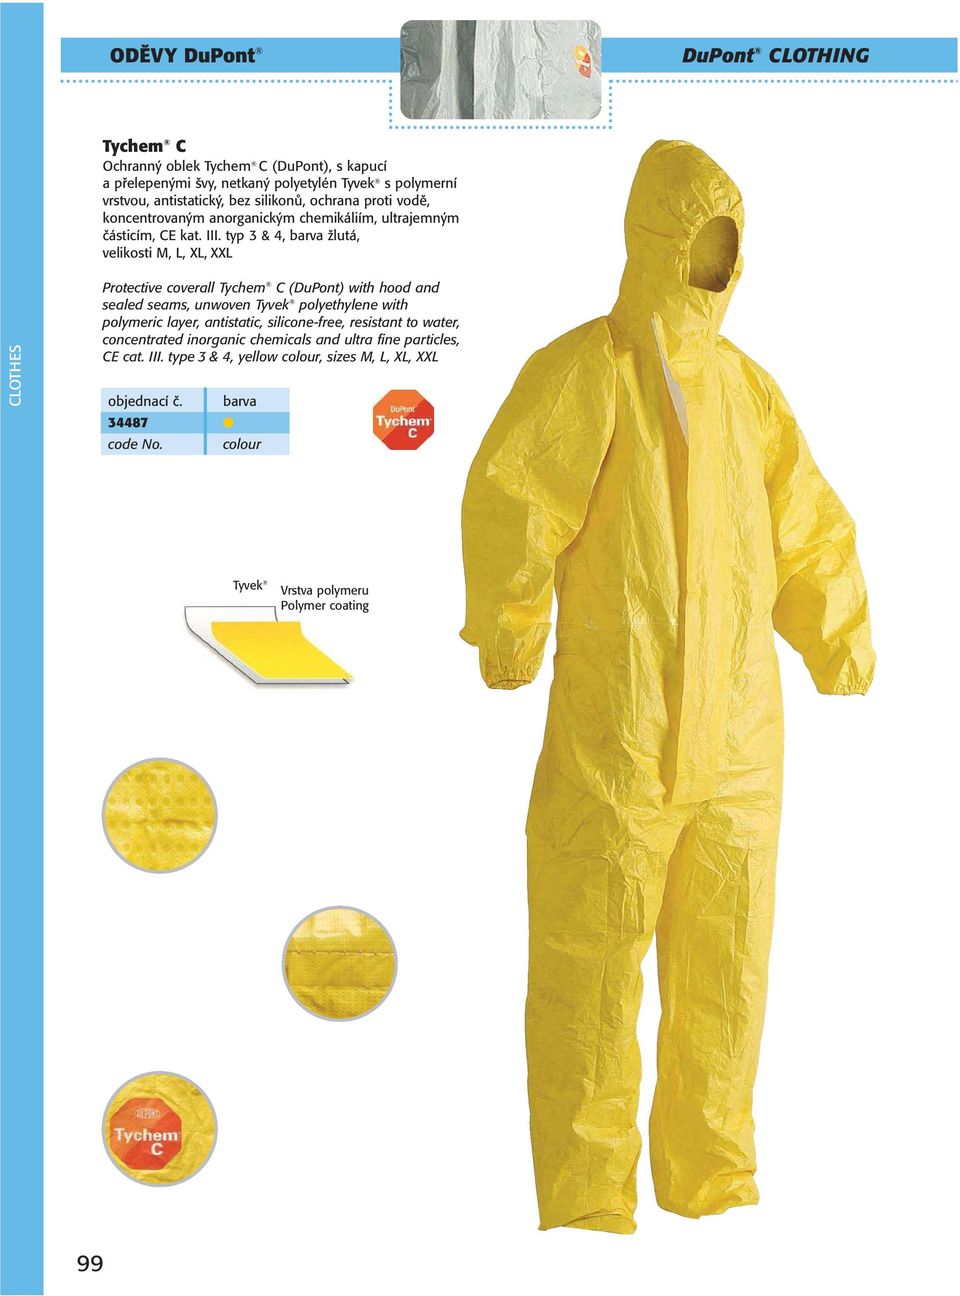 typ 3 & 4, žlutá, velikosti M, L, XL, XXL CLOTHES Protective coverall Tychem C (DuPont) with hood and sealed seams, unwoven Tyvek polyethylene with